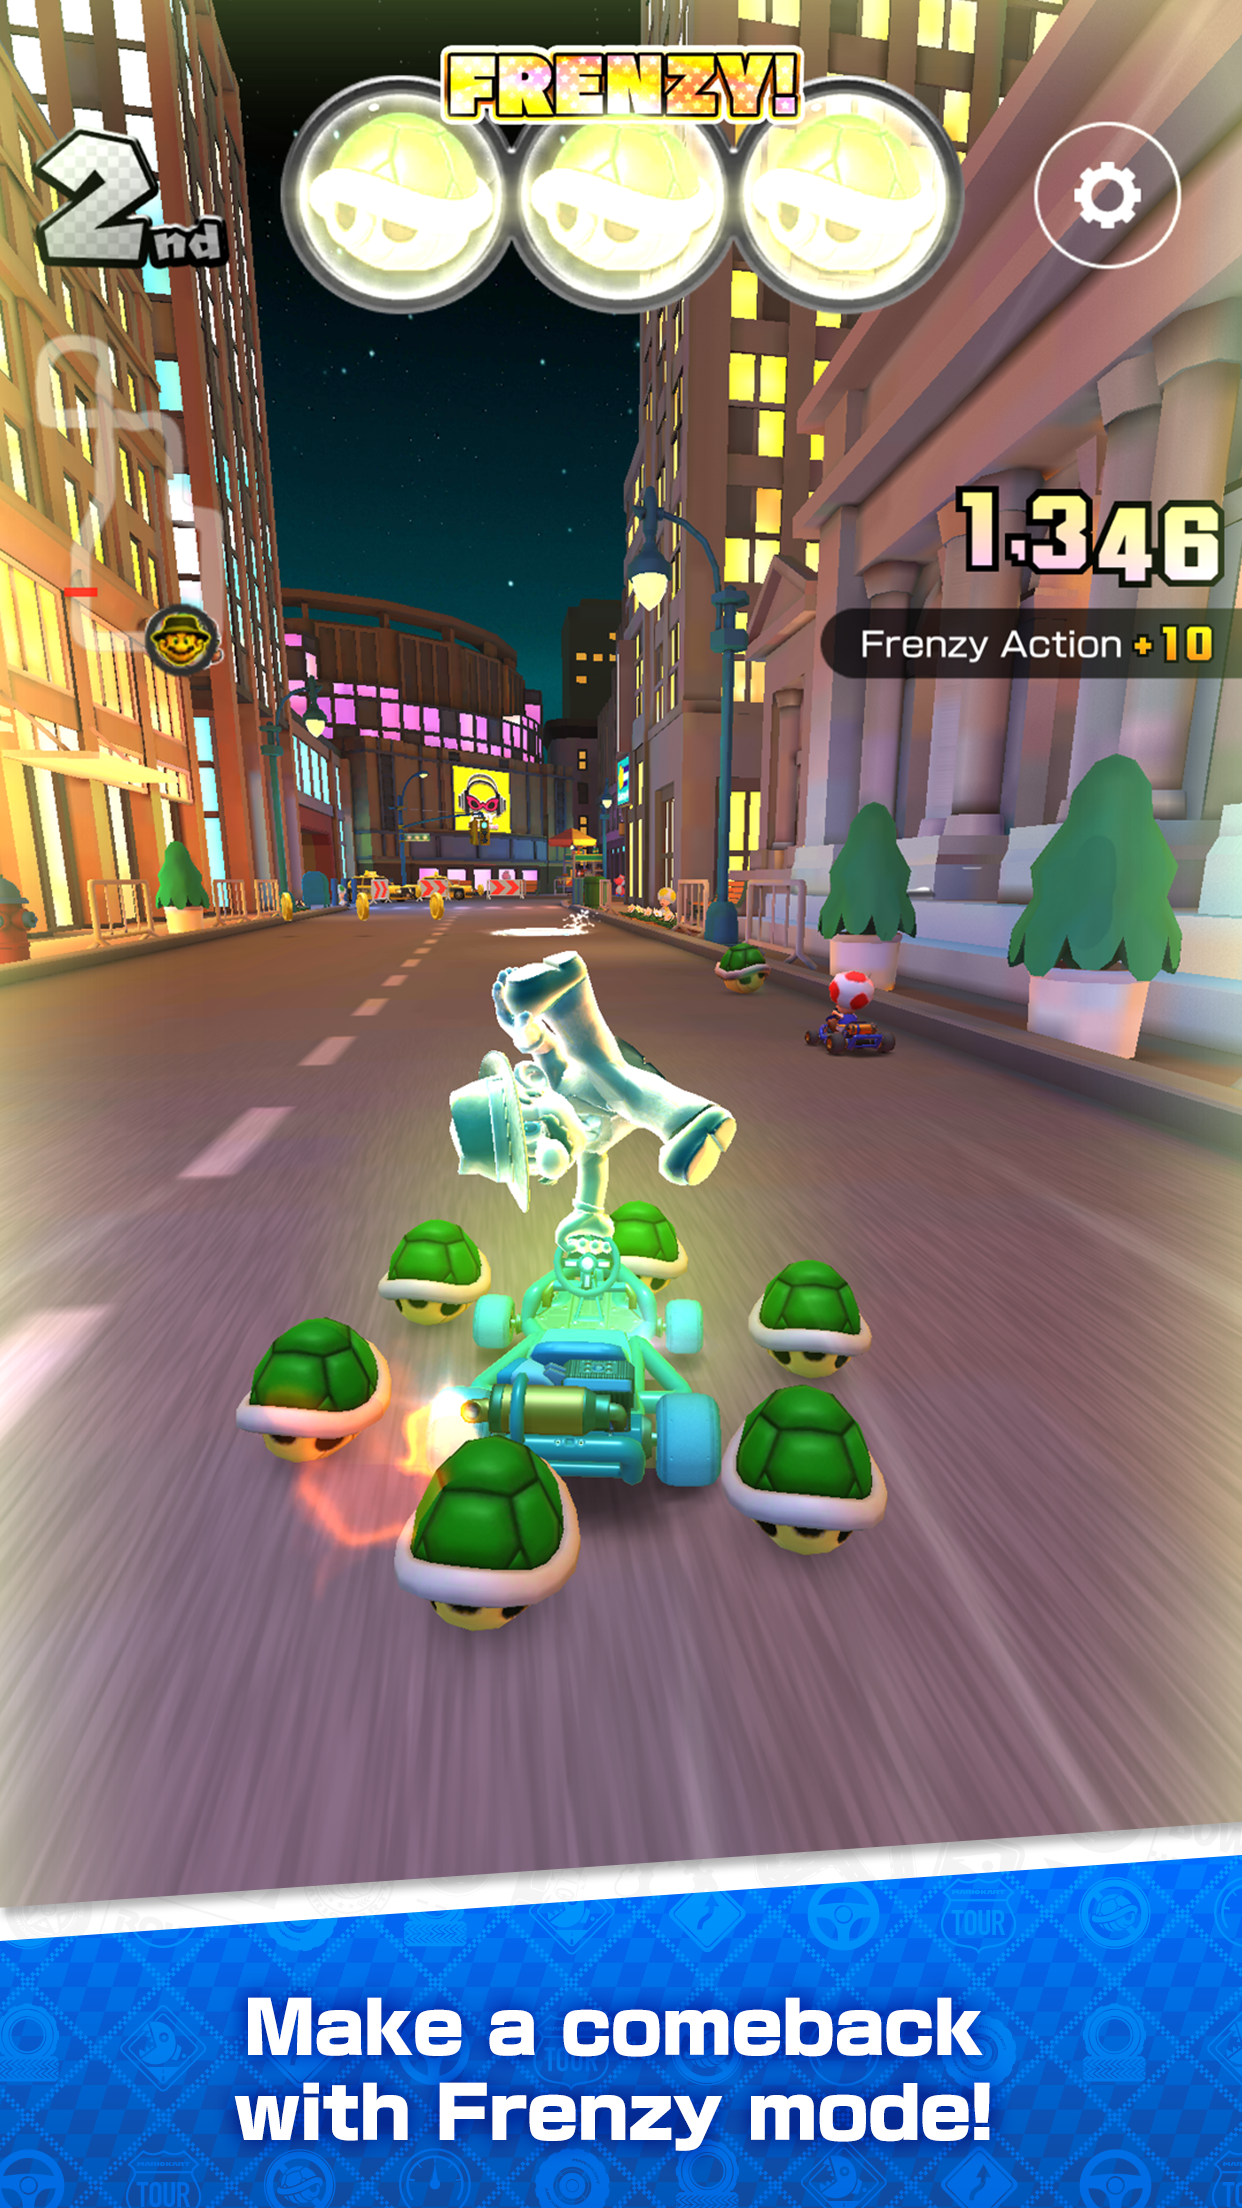 Mario Kart Tour - Part 1: F2P FREE DOWNLOAD! LET'S RACE! (Android